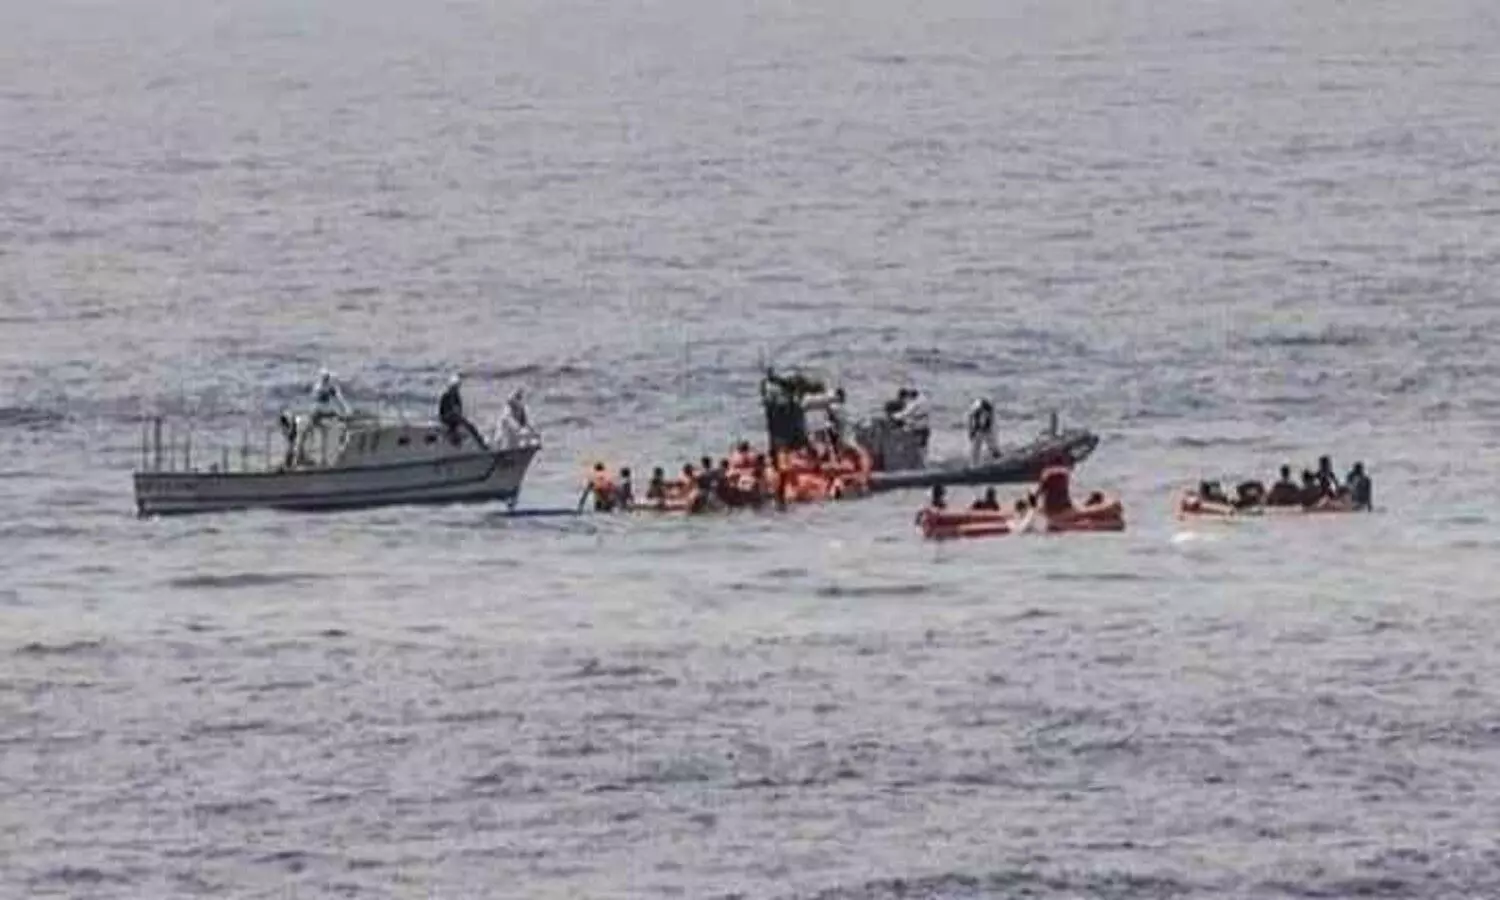 Syria Boat Accident